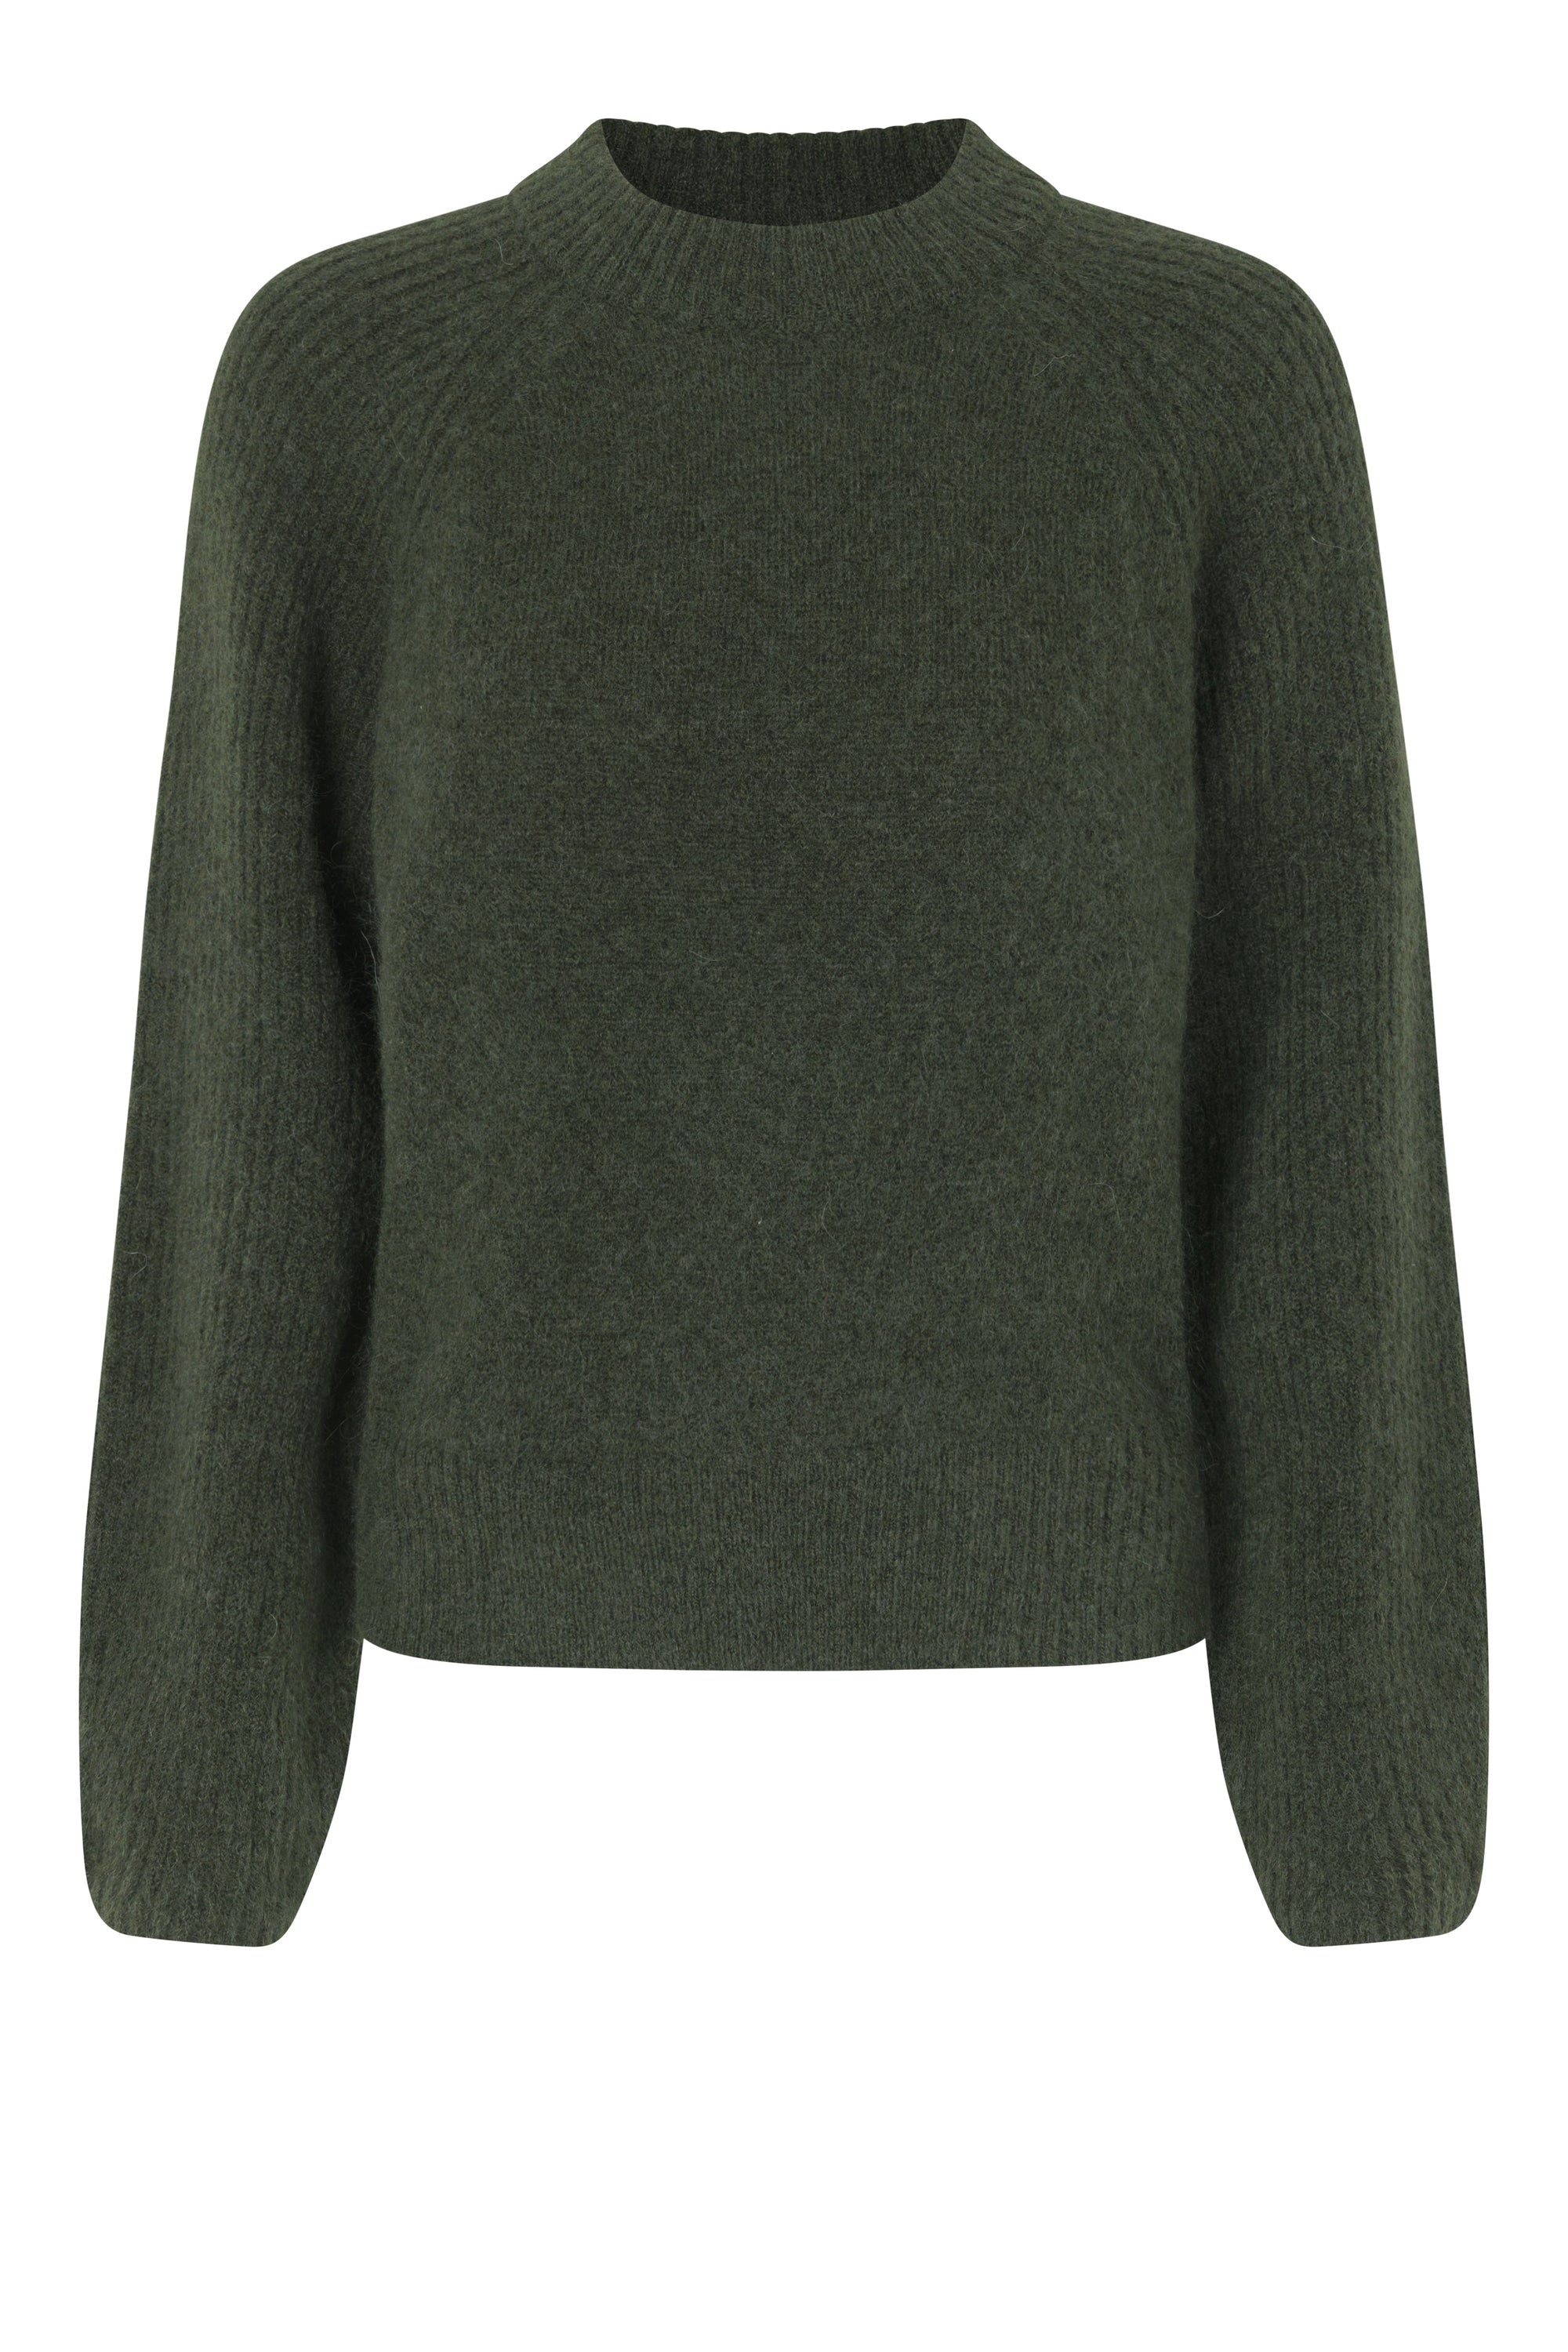 Brookline Knit New O-Neck, Forest